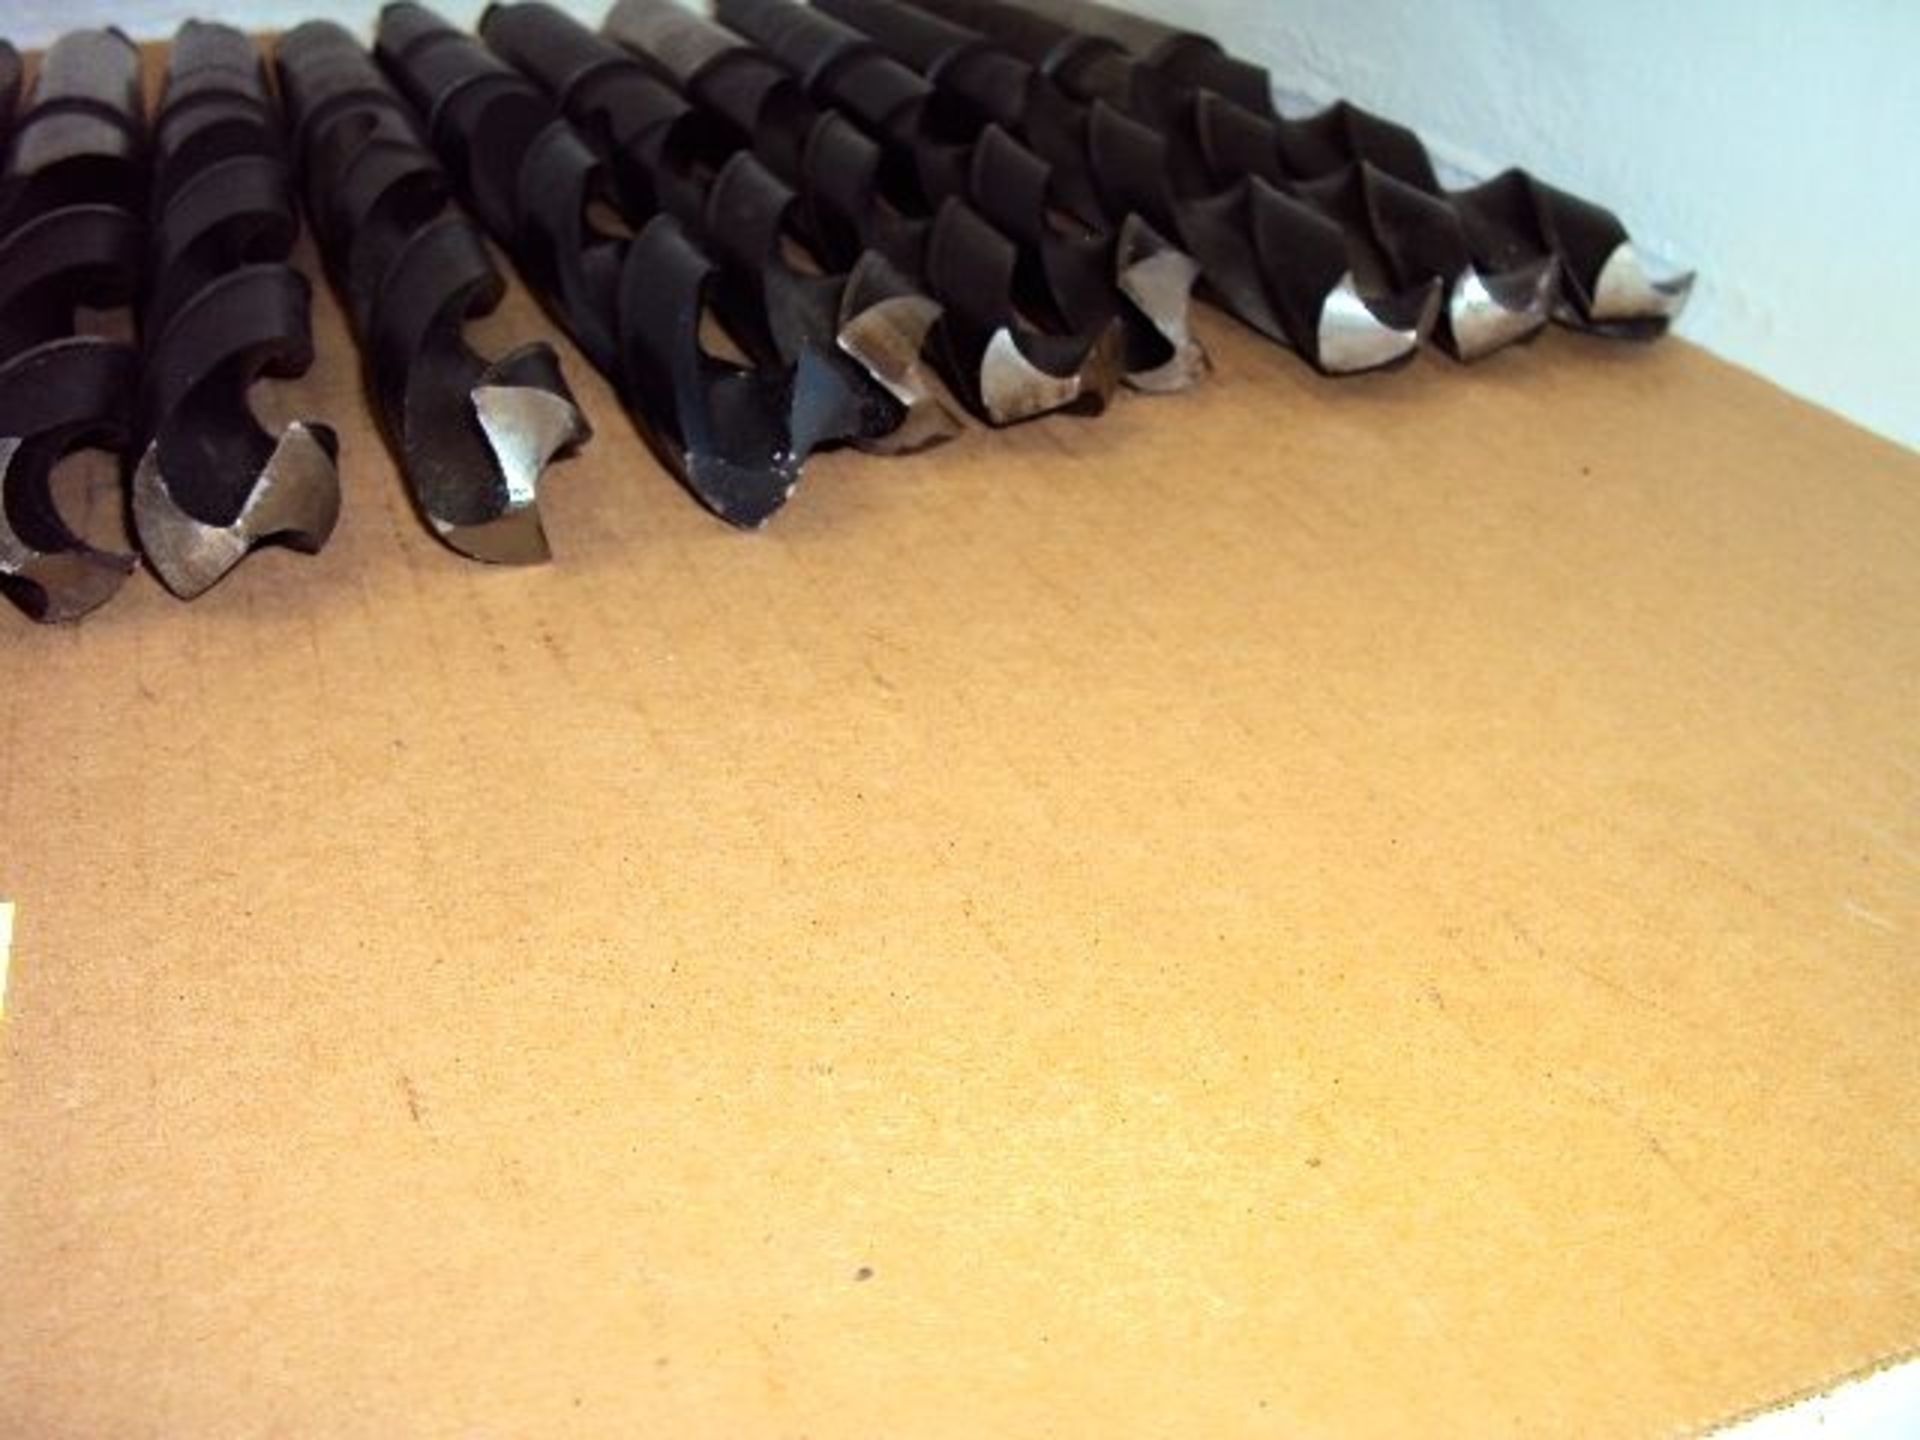 (28) MT4 Taper Shank HSS Drills 1-1/16” to 1-1/2” by 64ths - No Repeats - missing 1-17/64 - Image 5 of 5